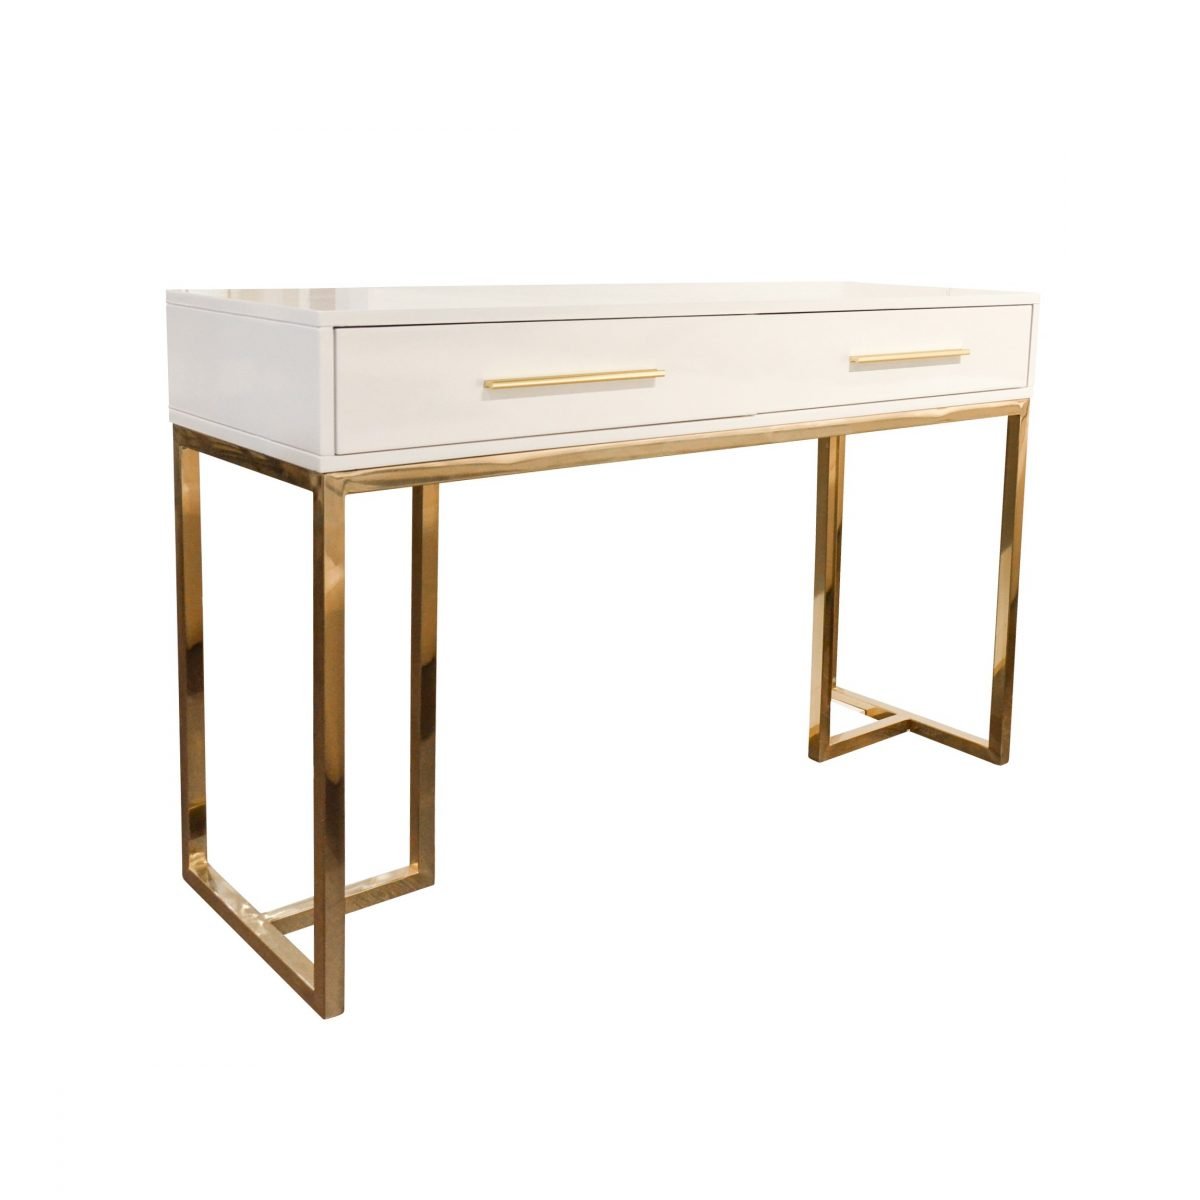 ADELINE White Lacquer Console Table